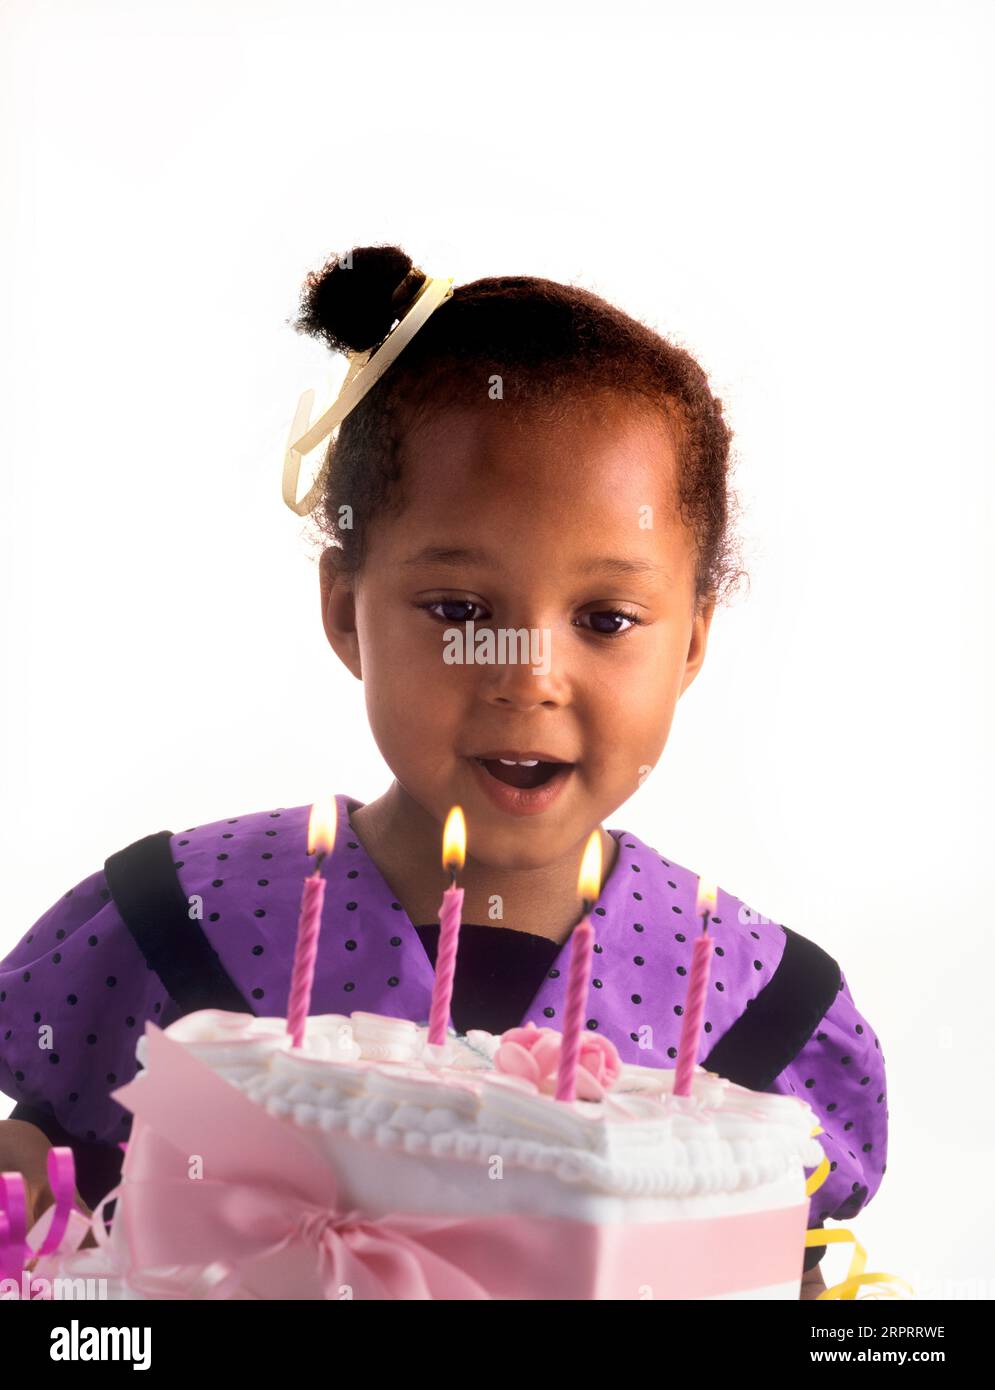 BIRTHDAY INFANT GIRL HAPPY Cake candles 4 years old cute pretty British African Afro Caribbean girl celebrating with her special birthday cake making Stock Photo